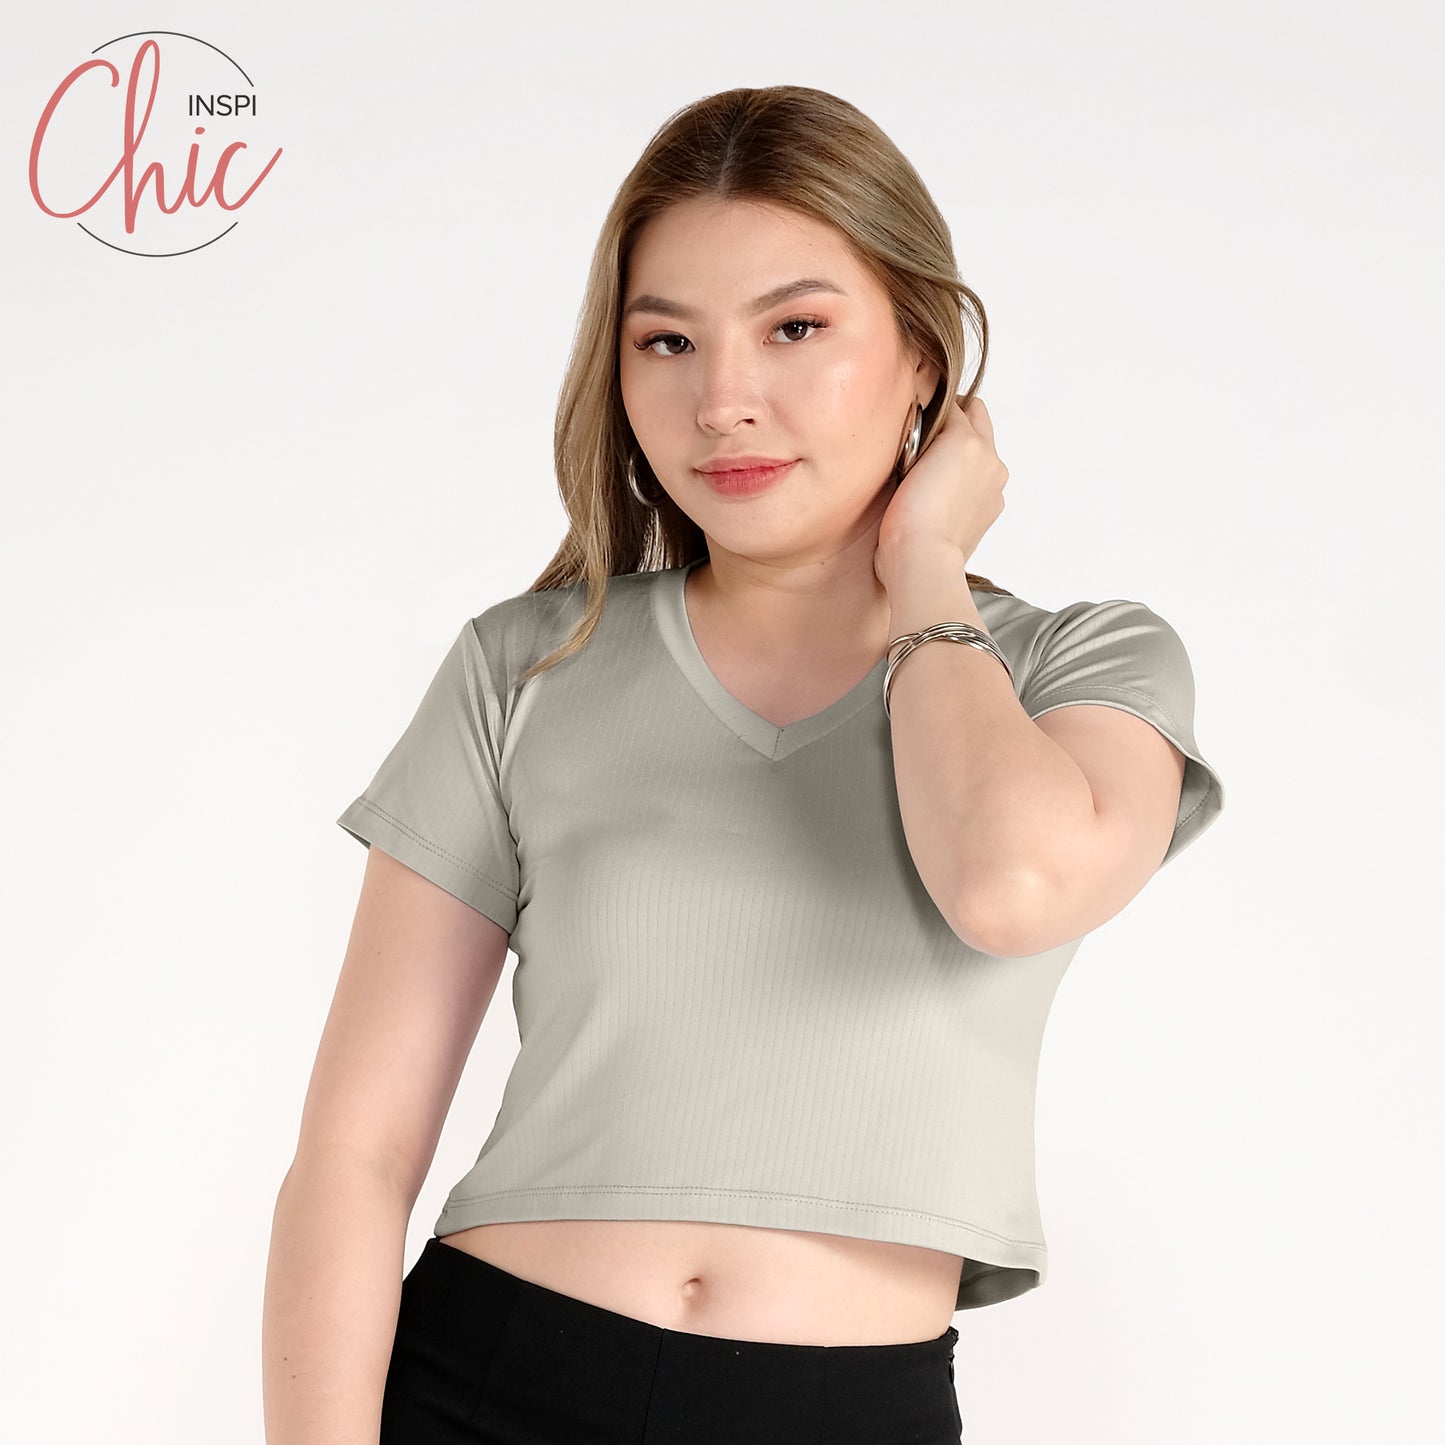 INSPI Chic Color Me Ribbed 3/4 Top Croptop Shirt for Women Sleeveless Top